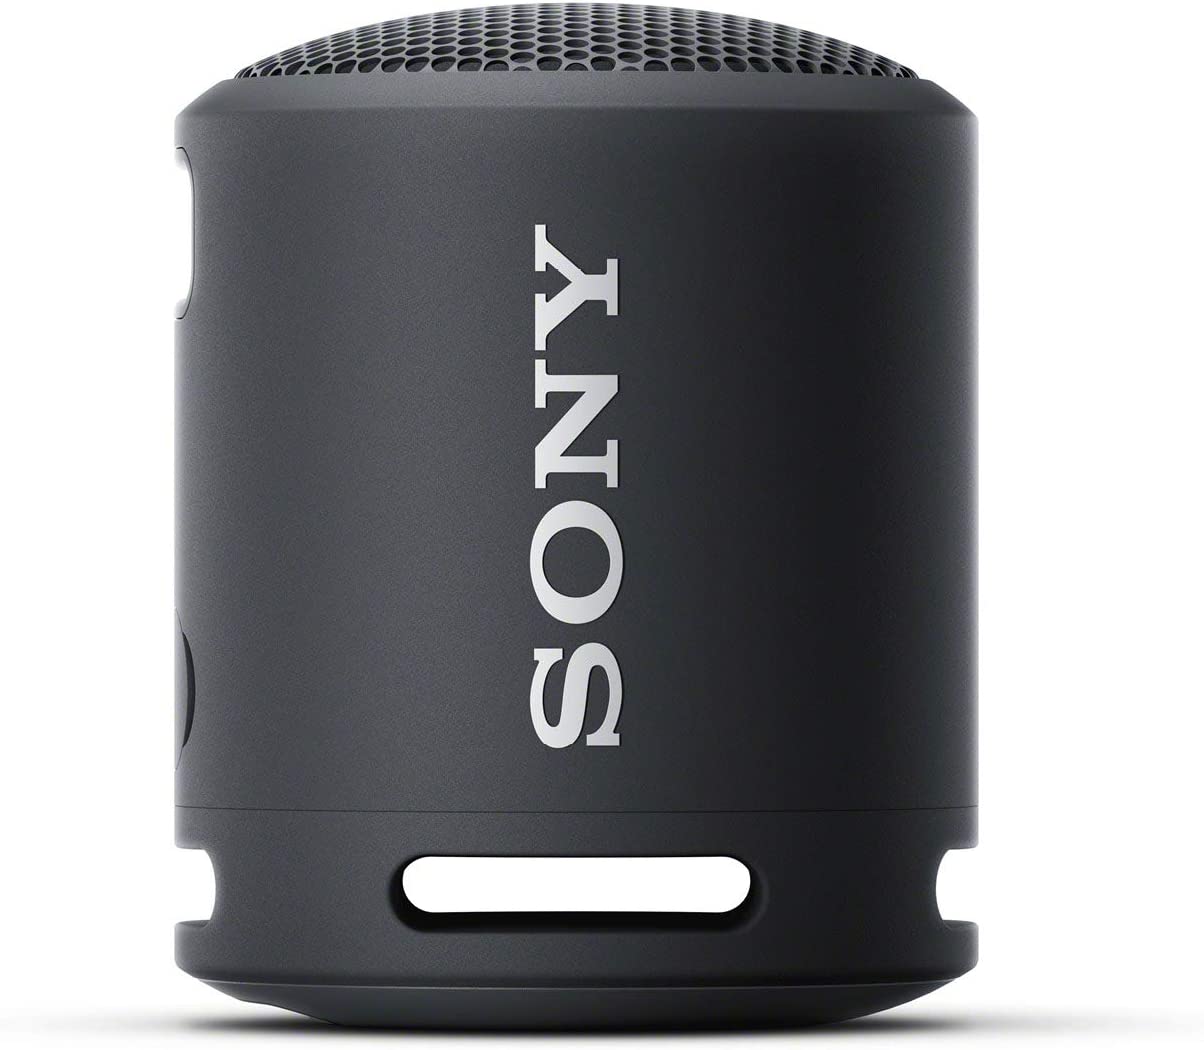 Sony SRS-XB13 Extra BASS Wireless Bluetooth Portable Lightweight Compact Travel Speaker, IP67 Waterproof & Durable for Outdoor, 16 Hour Battery, USB Type-C, Removable Strap, and Speakerphone, Black